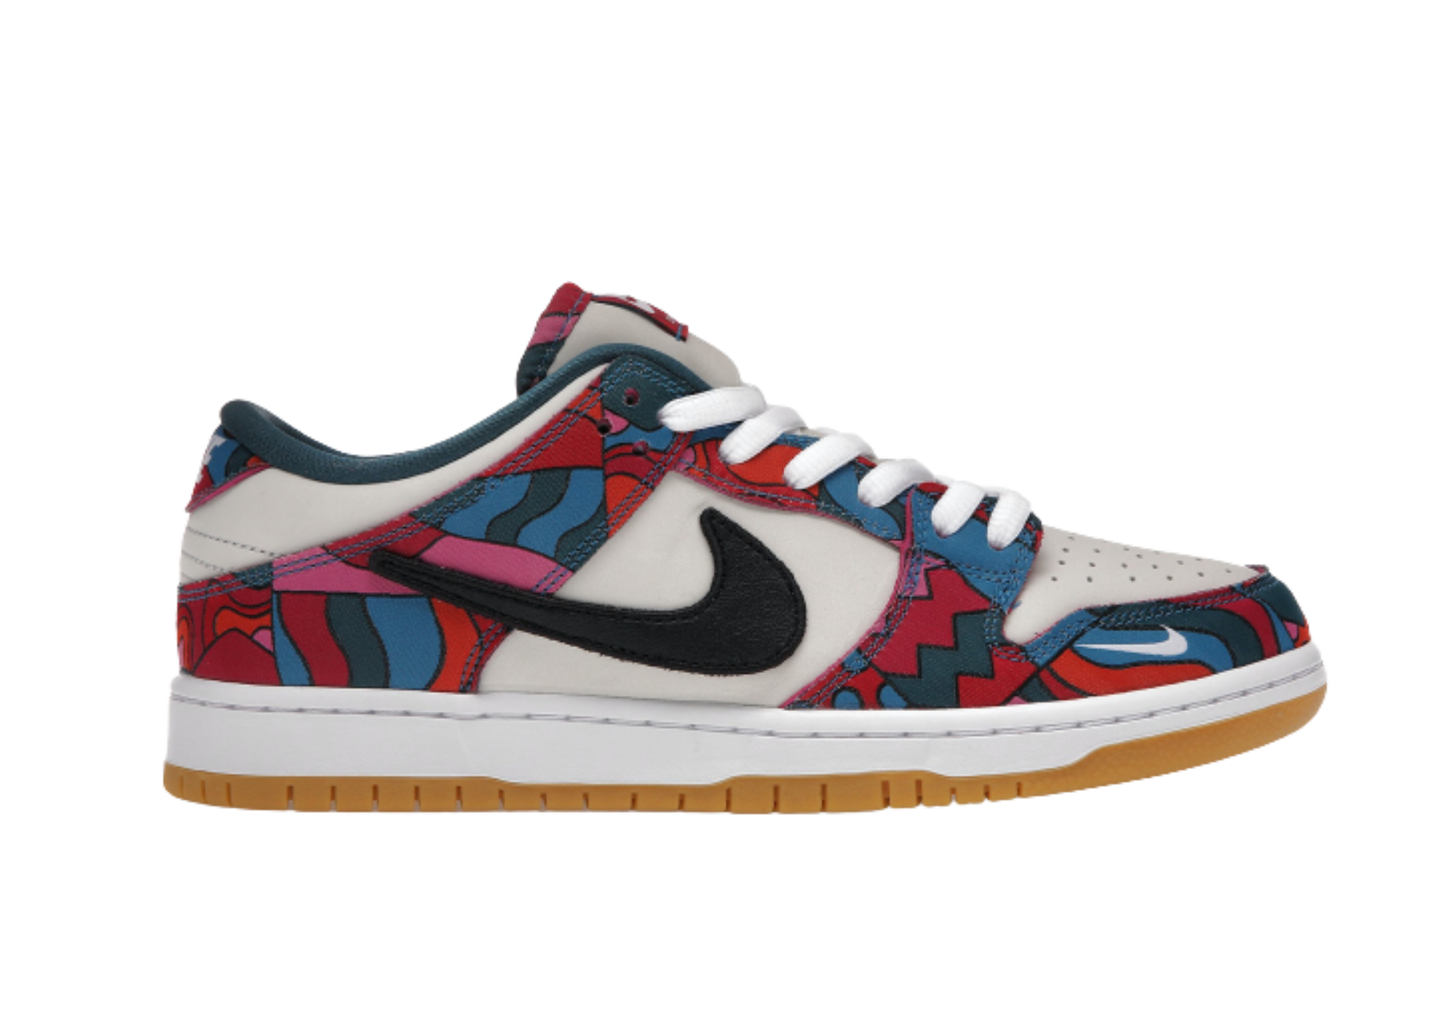 Nike SB Dunk Low Pro 'Parra Abstract Art (2021)'